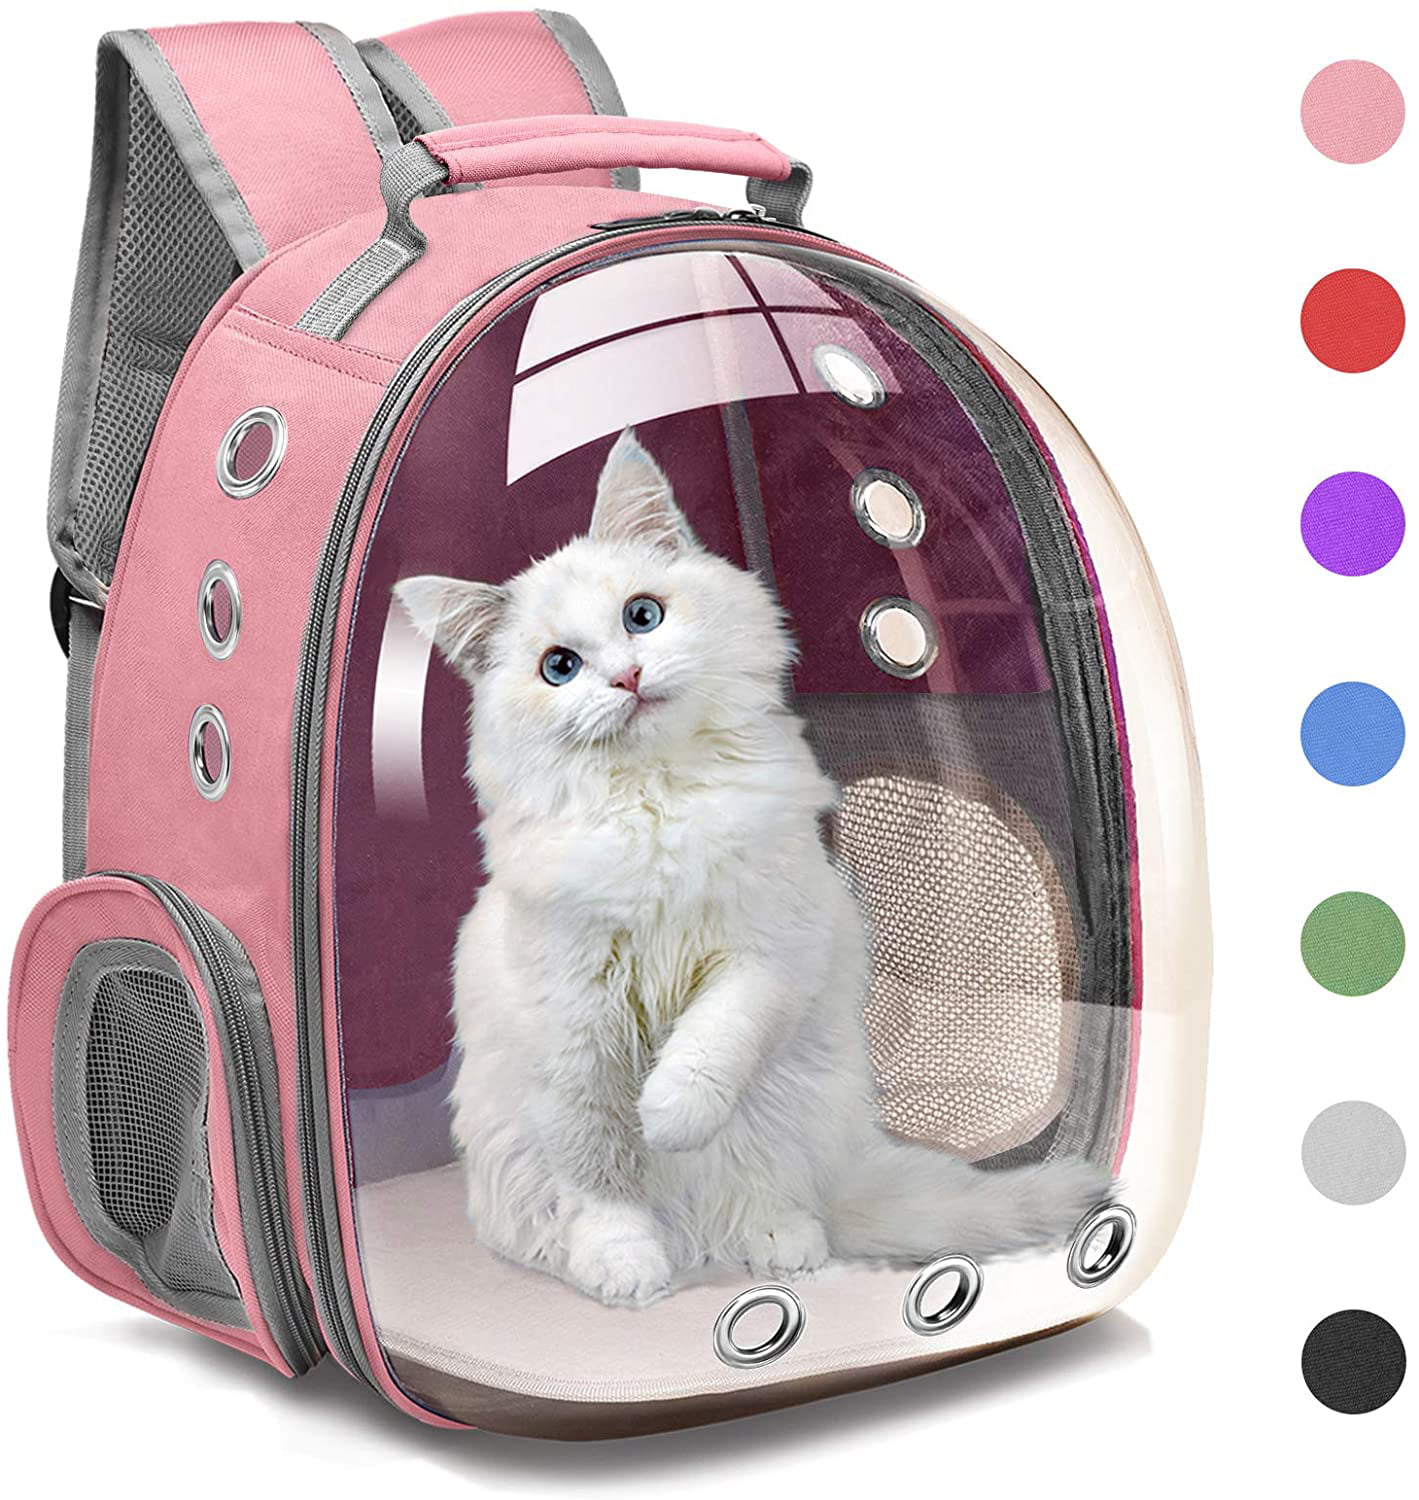 Portable Backpack Capsule Space Breathable Pet Cage Carrying Bag for Travel Hiking Walking Outdoor Use Transparent Cat Carrier Red